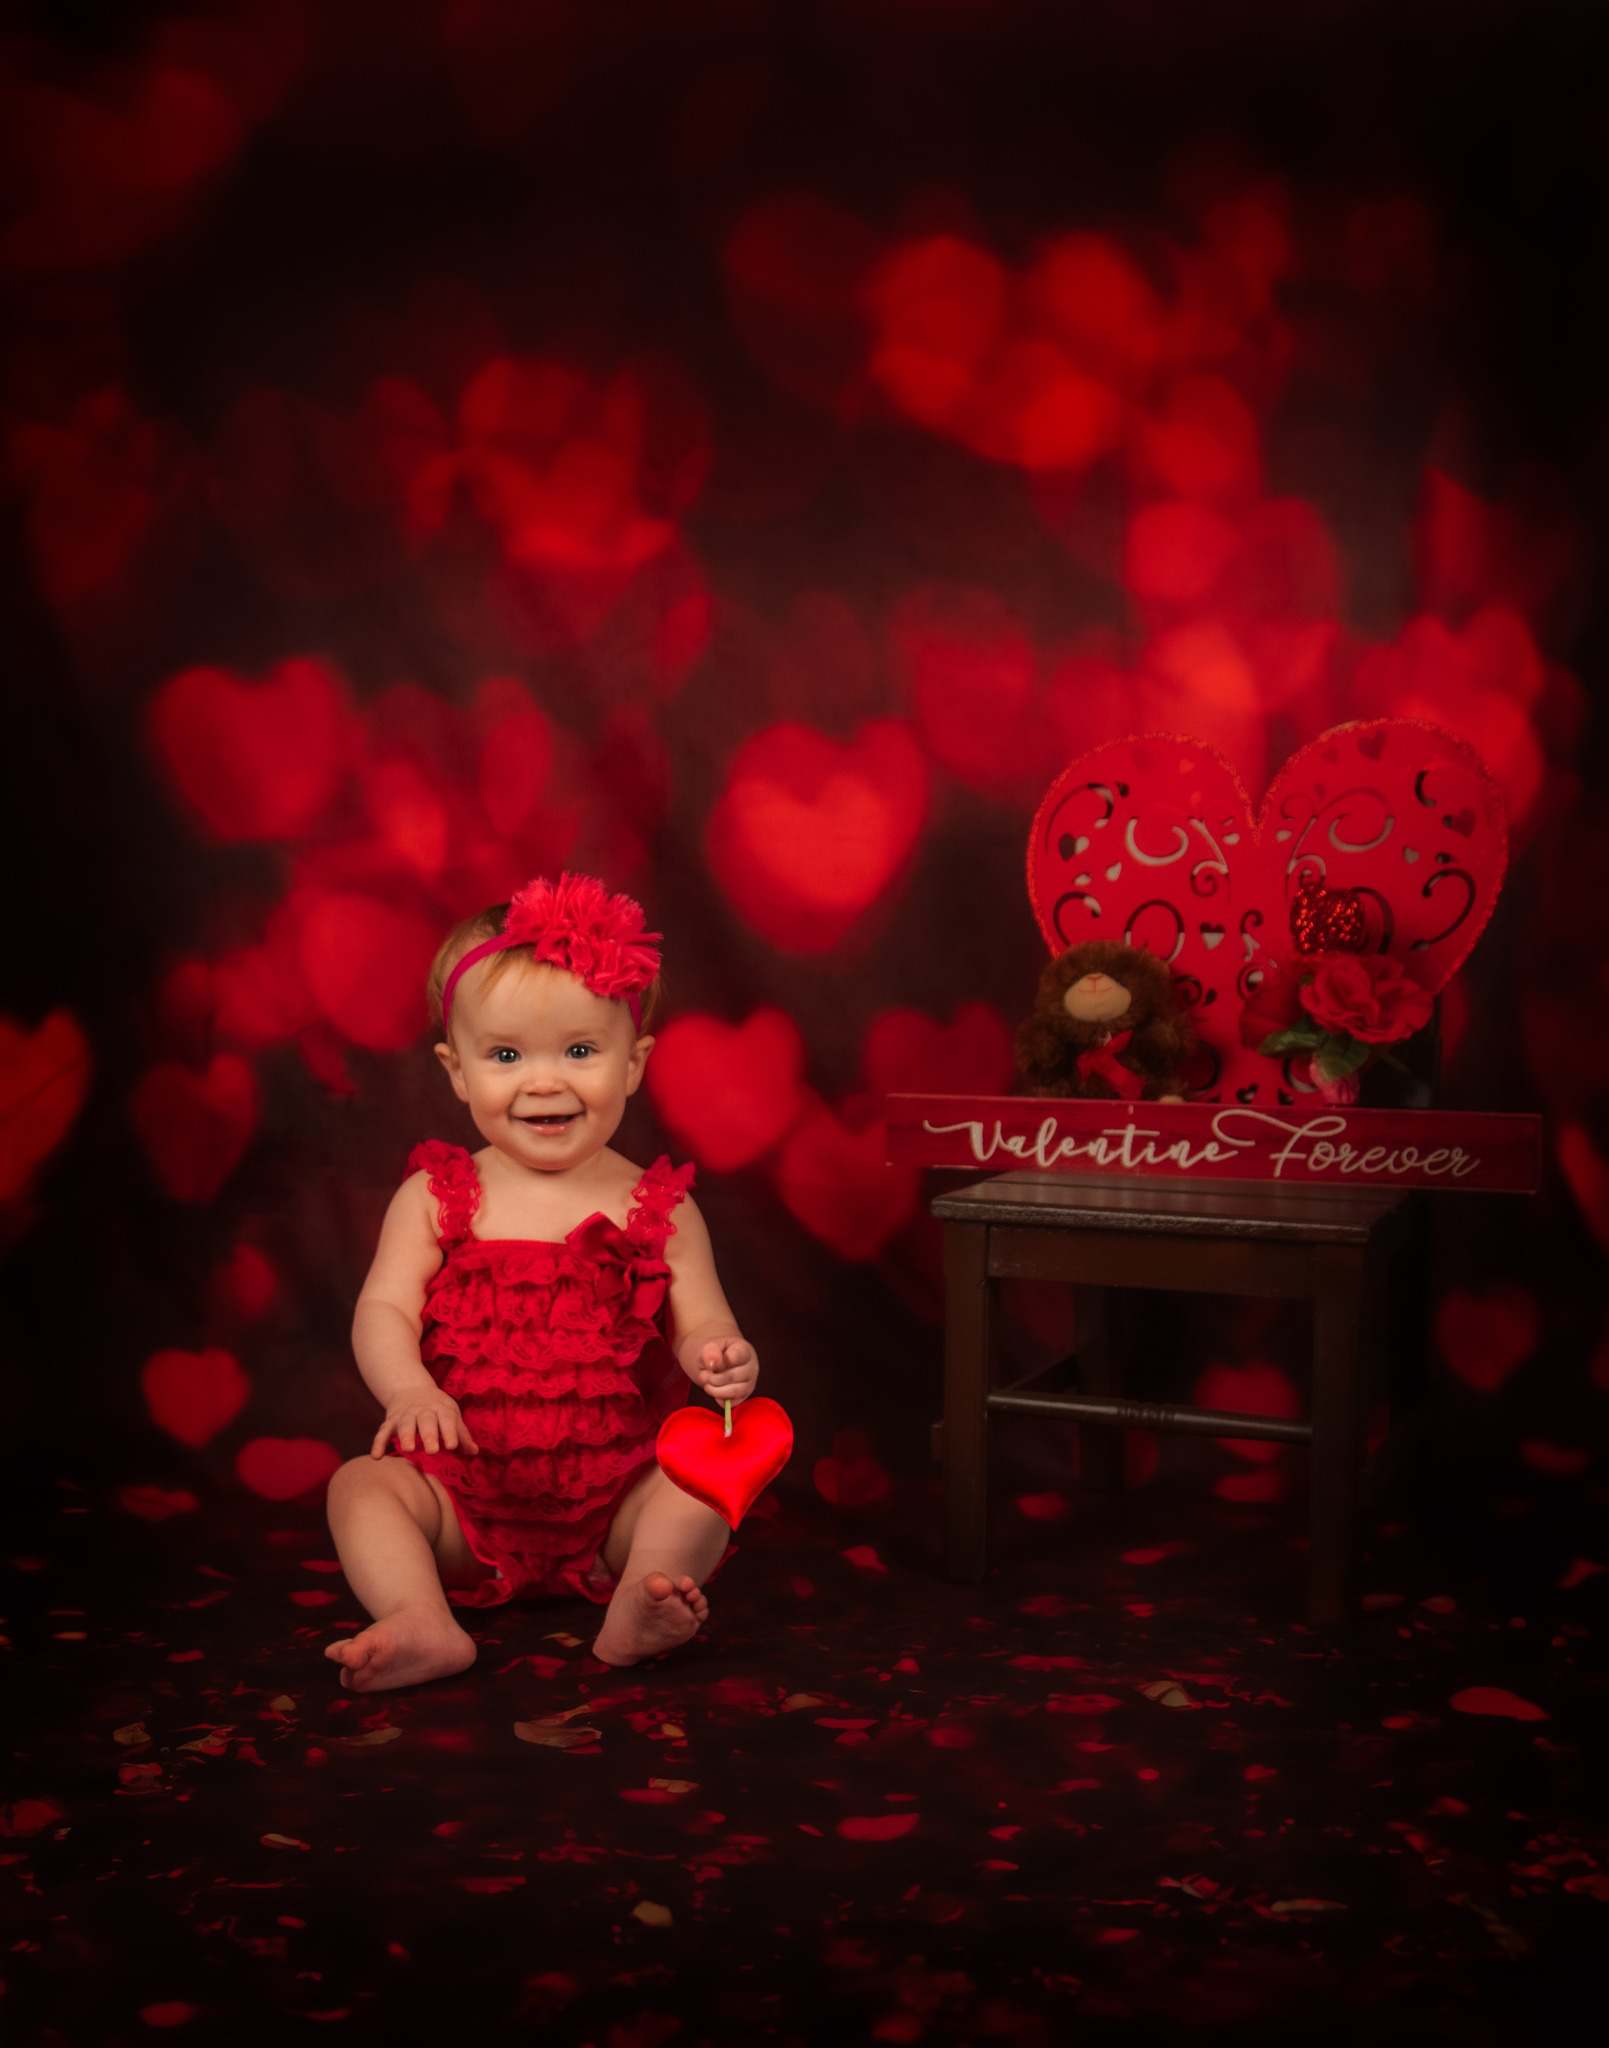 Kate Valentine's Day Backdrop Red Bokeh for Photography